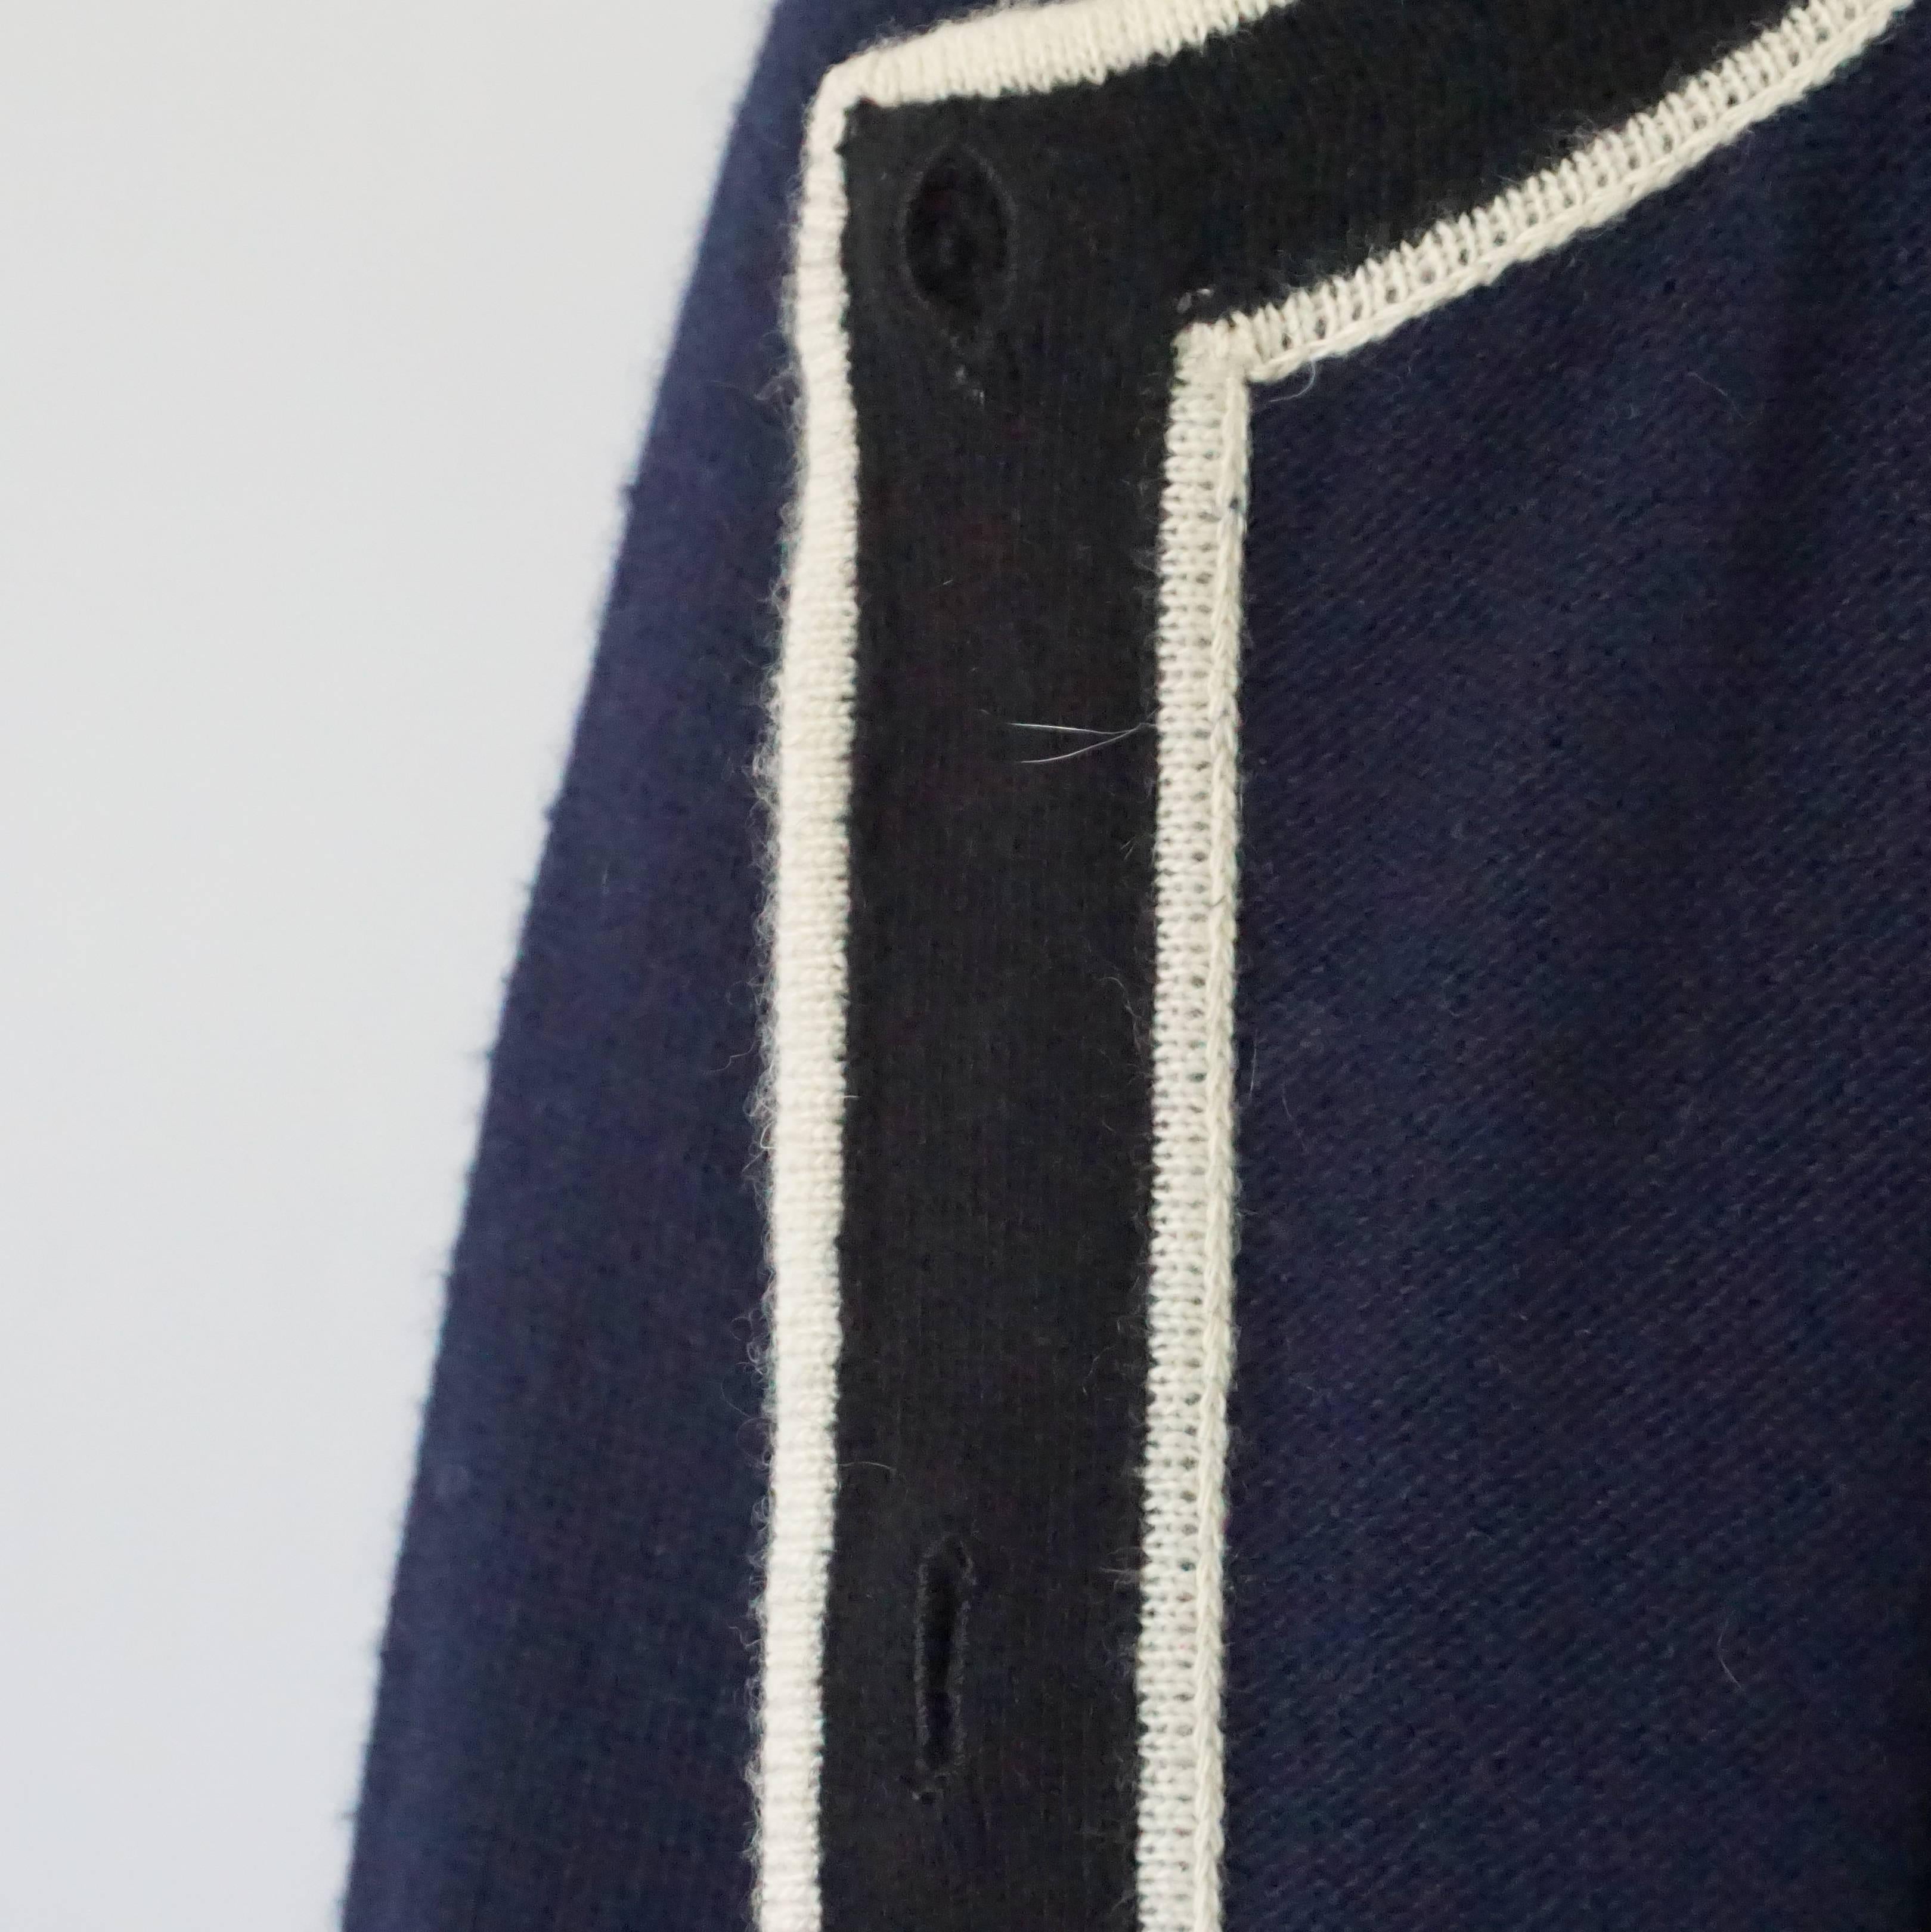 Women's Chanel Navy Cashmere Sweater Set with Black and White Trim - 38